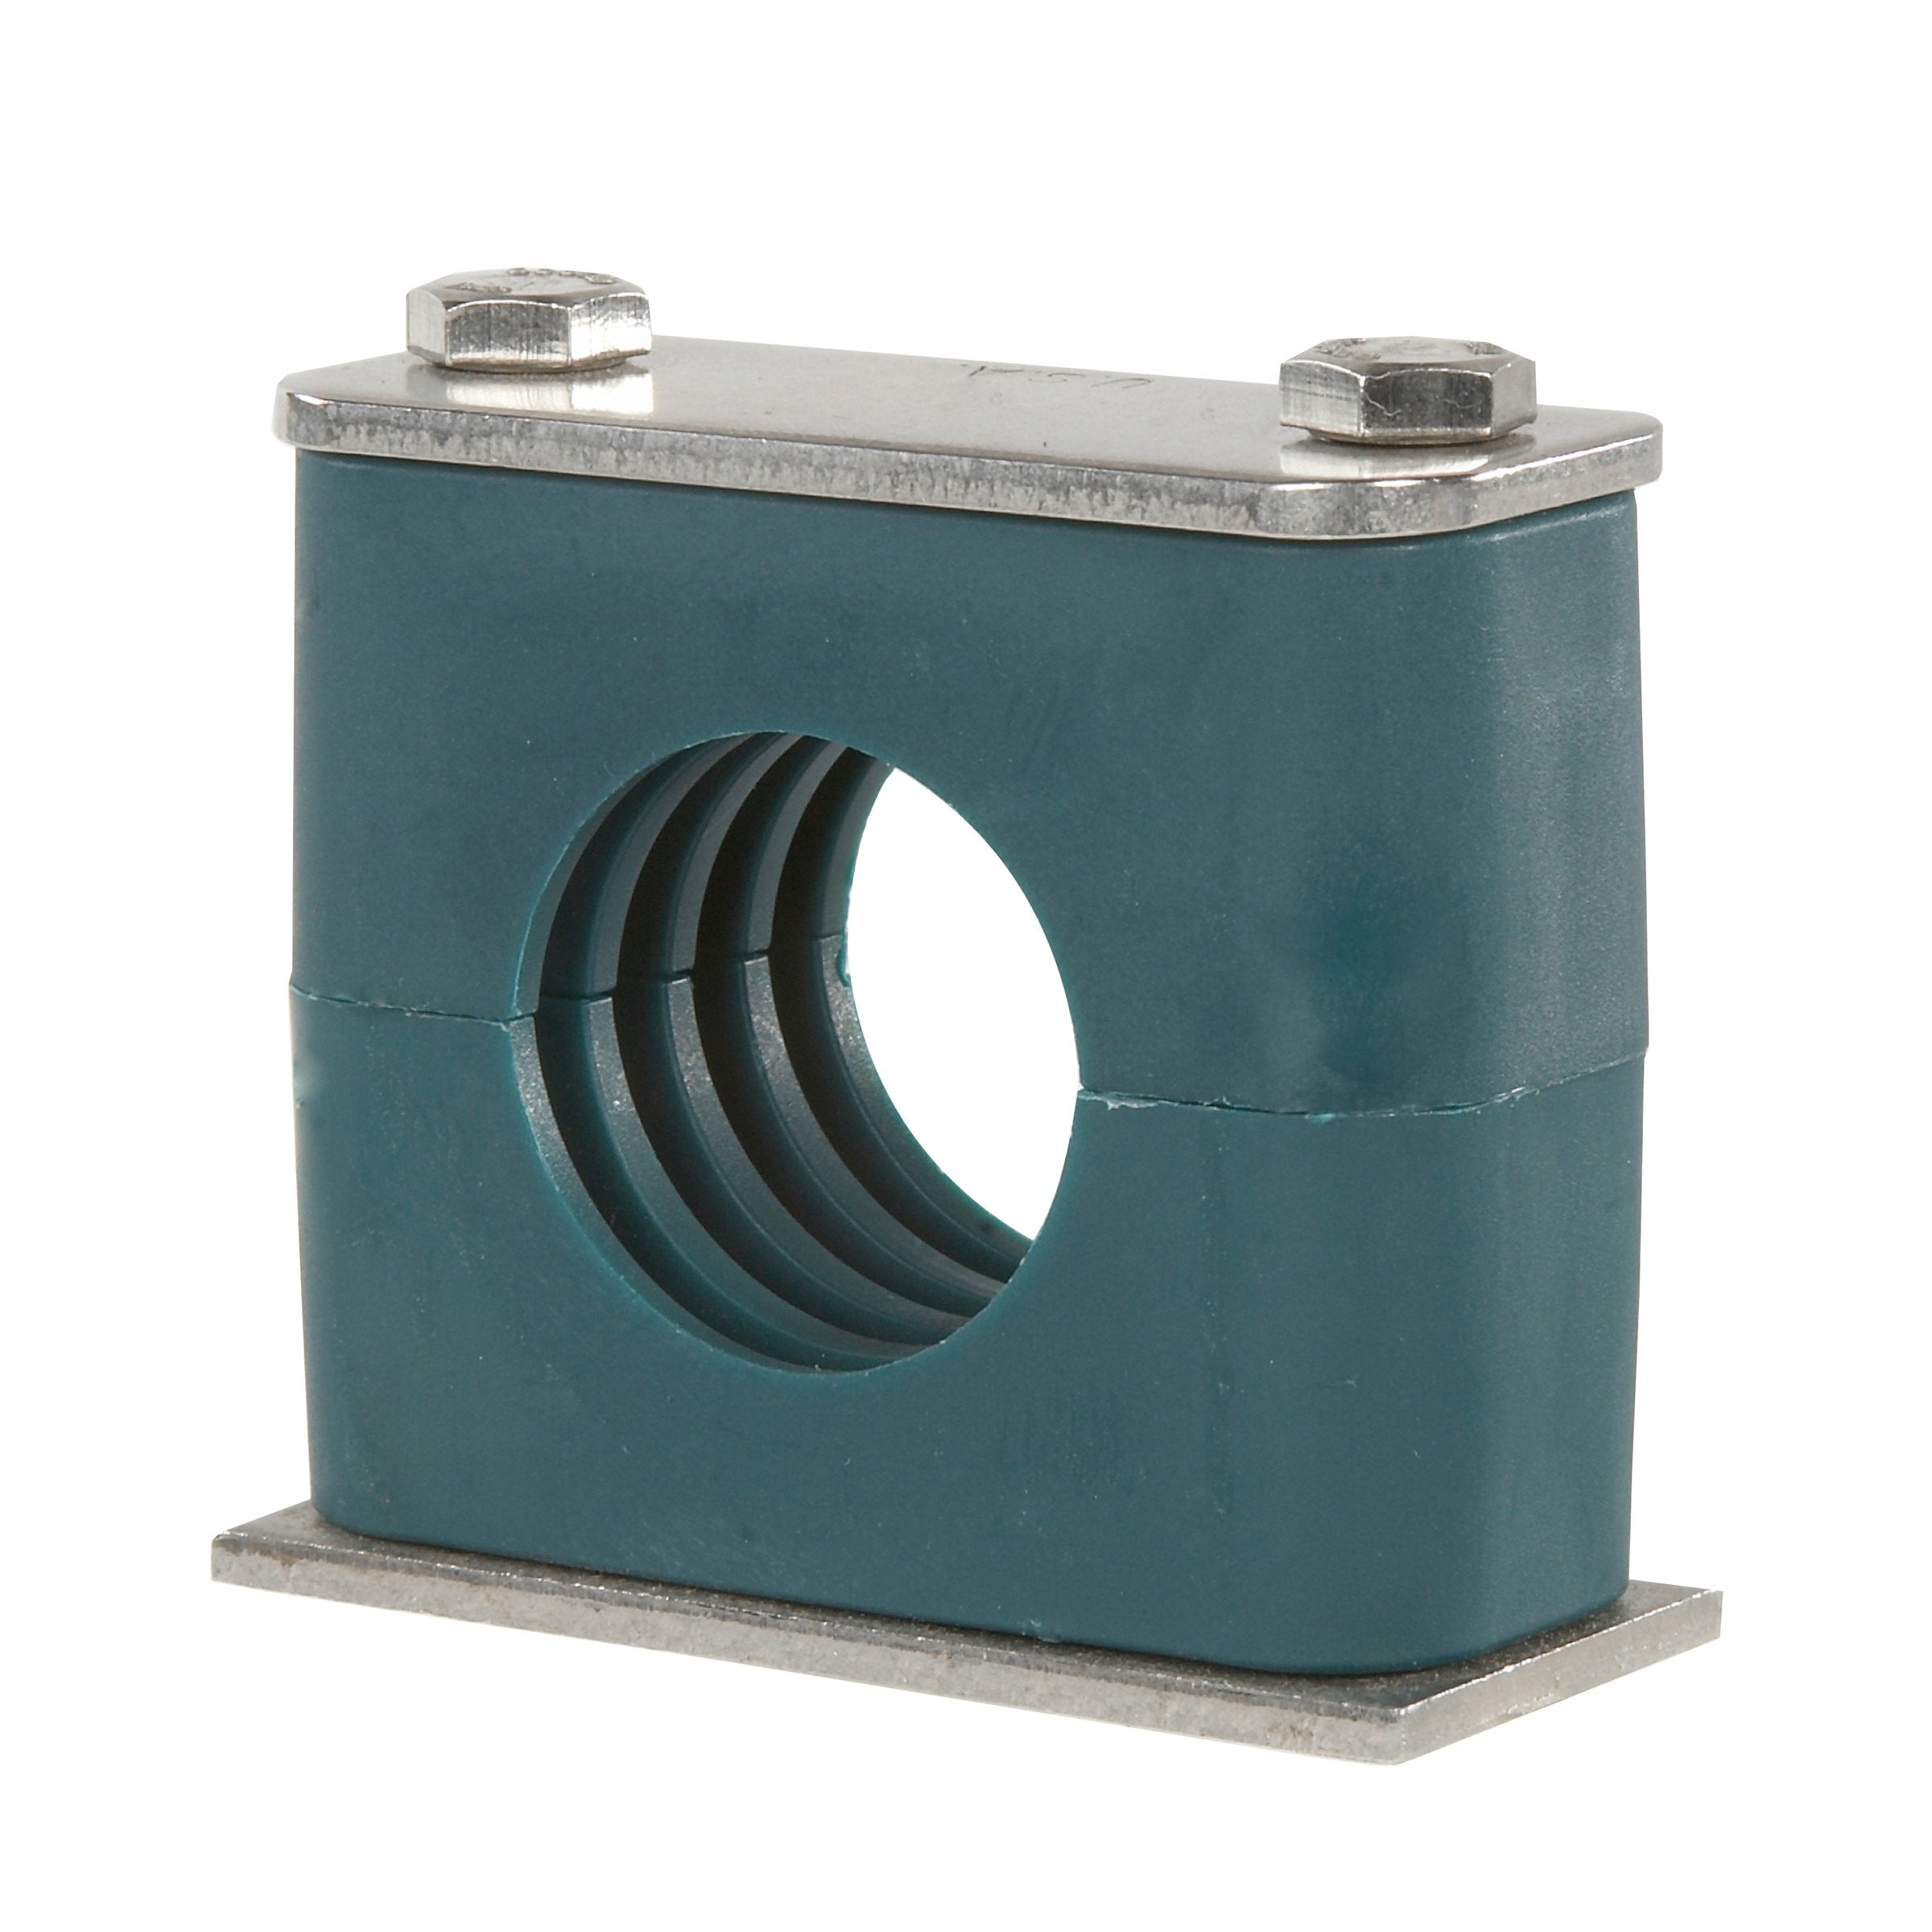 SP-212.7-PP-DP-AS-U-W10 : Stauff Clamp, Single Weld Plate, 0.5 inch (12.7mm) OD, for 1/2" Tube, Green PP Insert, Profiled Interior, Carbon Steel